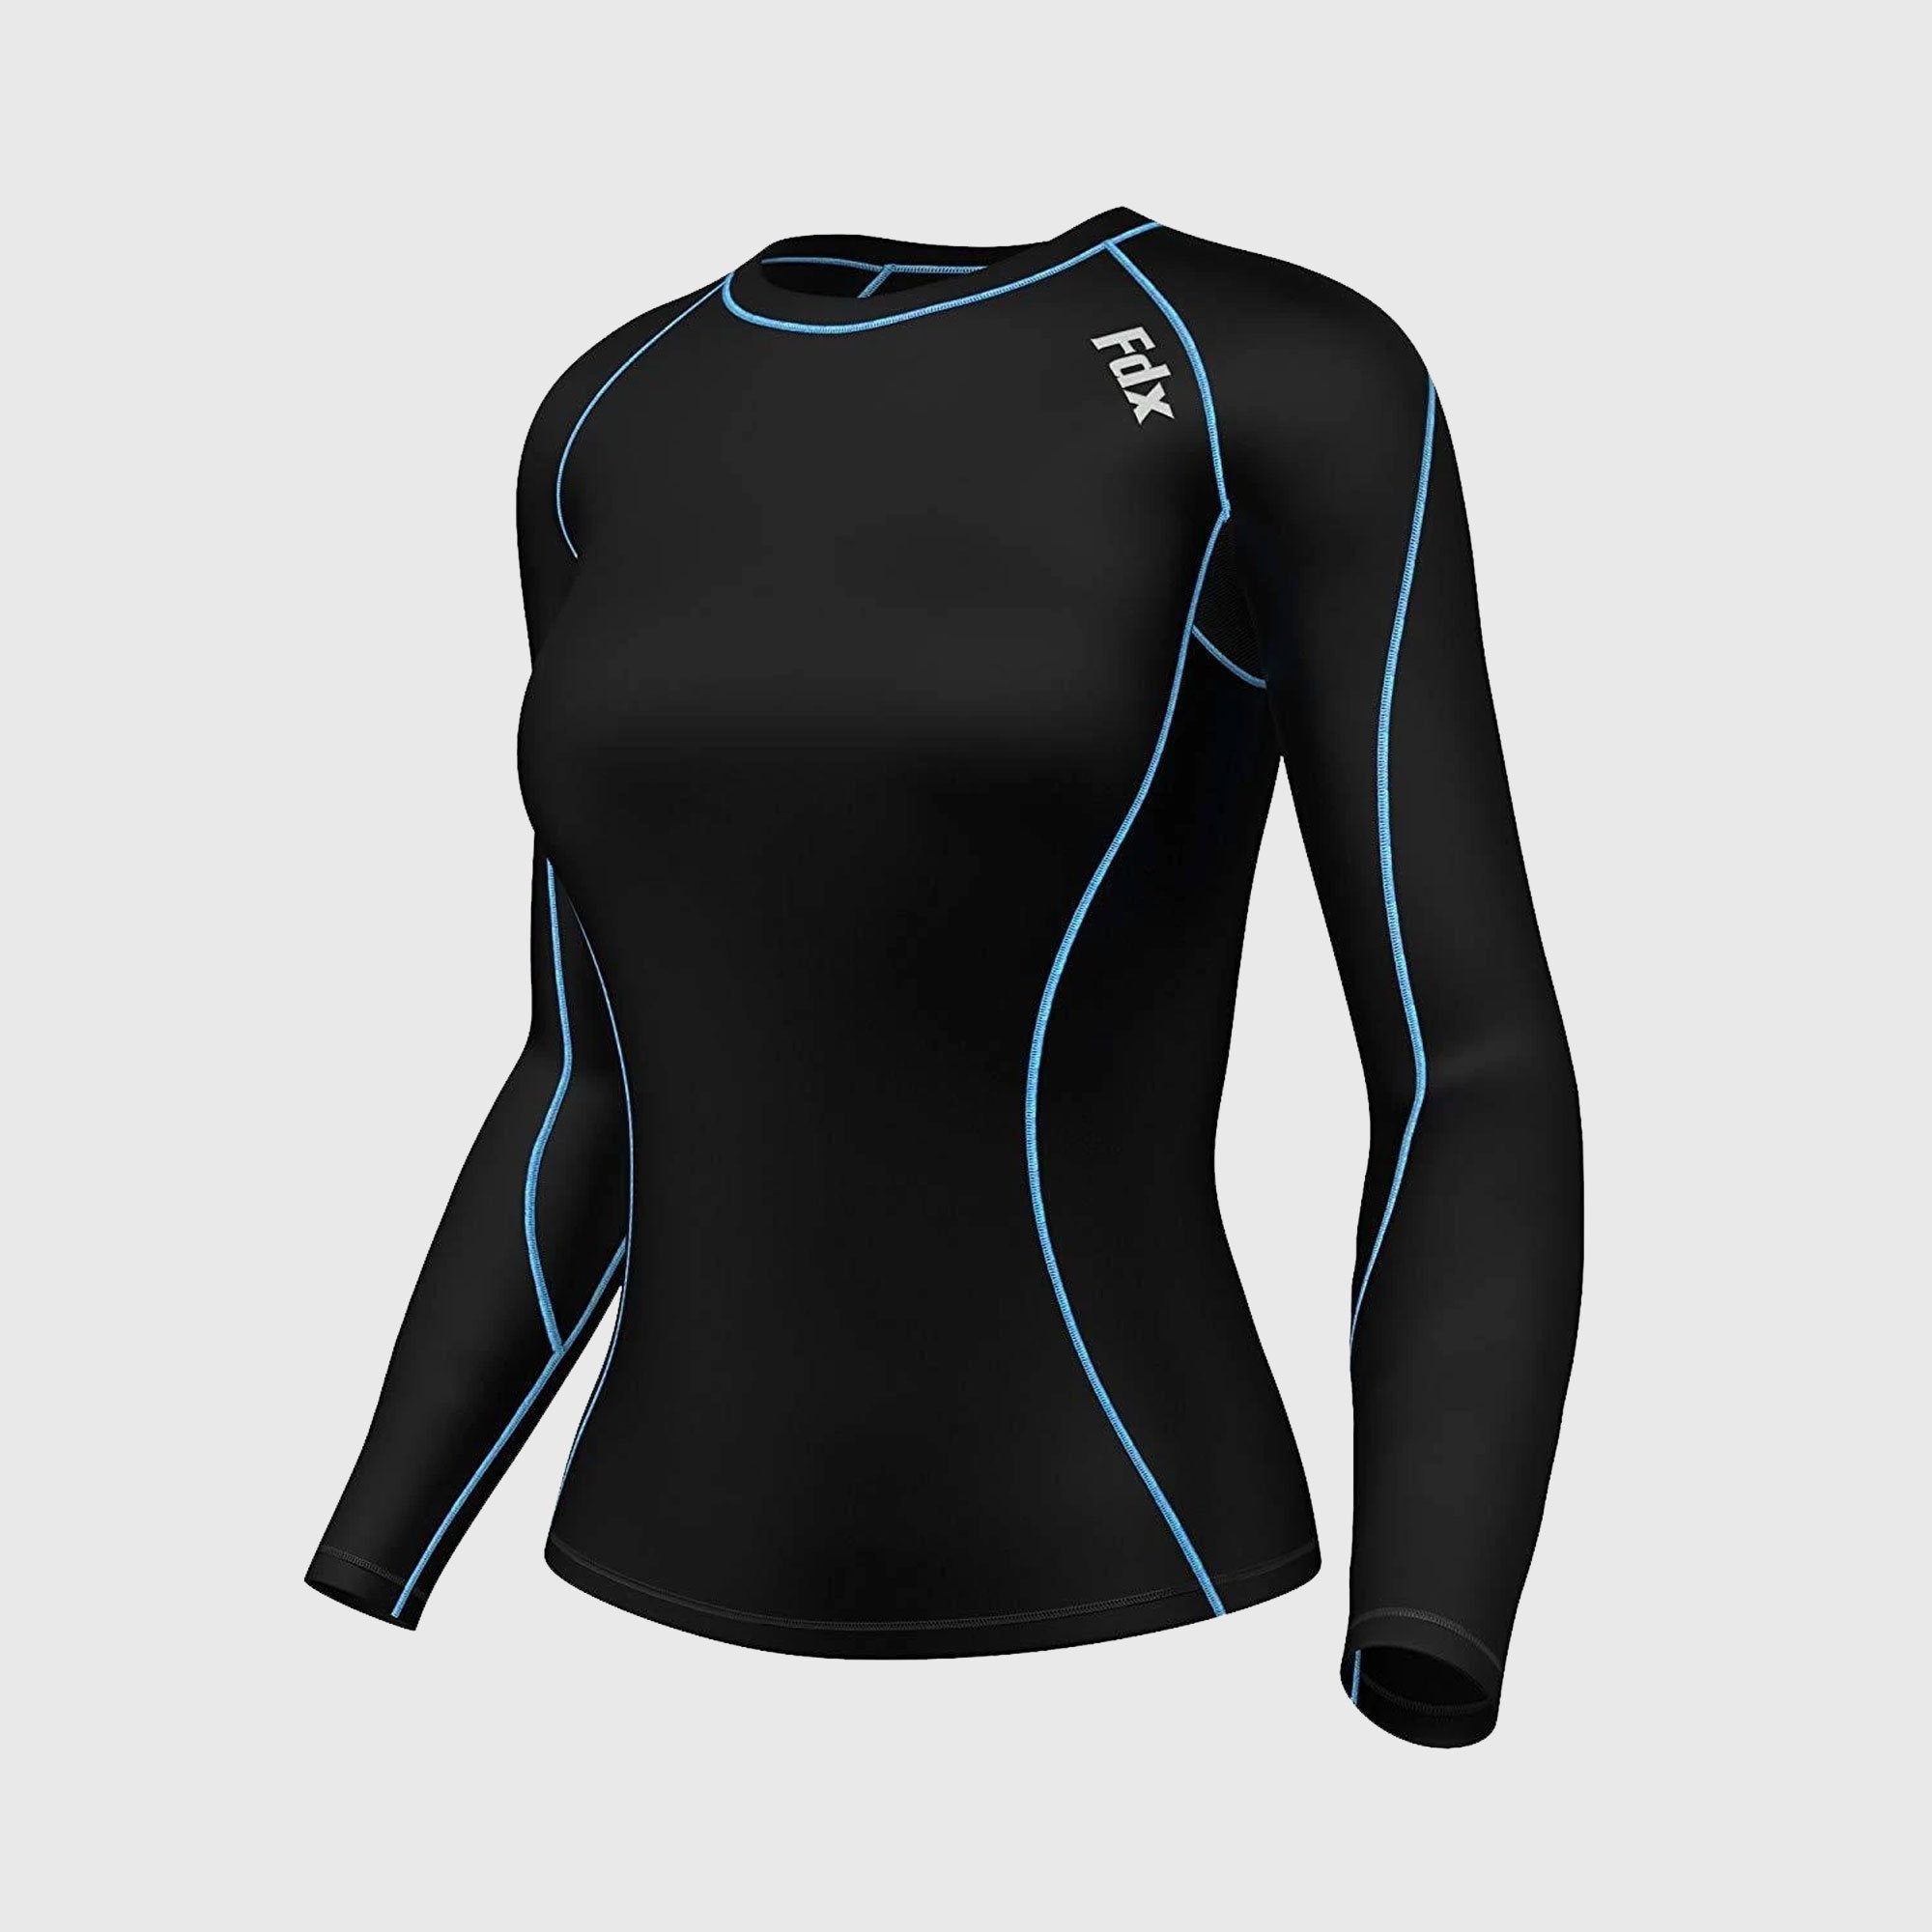 Fdx Women's Blue Black Long Sleeve Ultralight Compression Top Running Gym Workout Wear Rash Guard Stretchable Breathable Quick Dry - Monarch